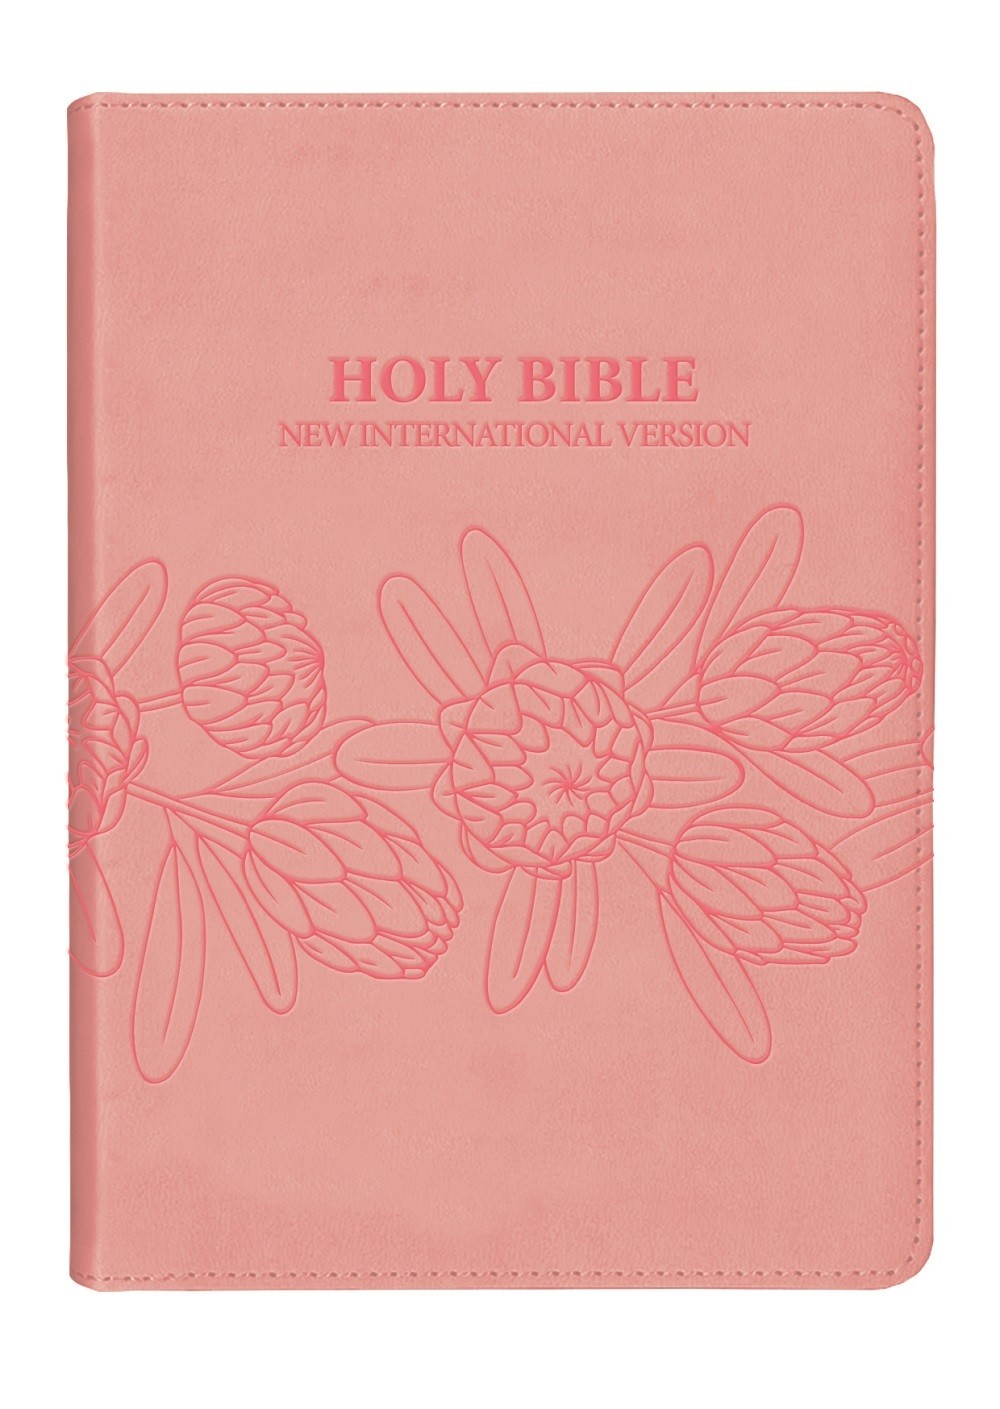 NIV LEATHER TOUCH SALMON PINK PROTEA BIBLE